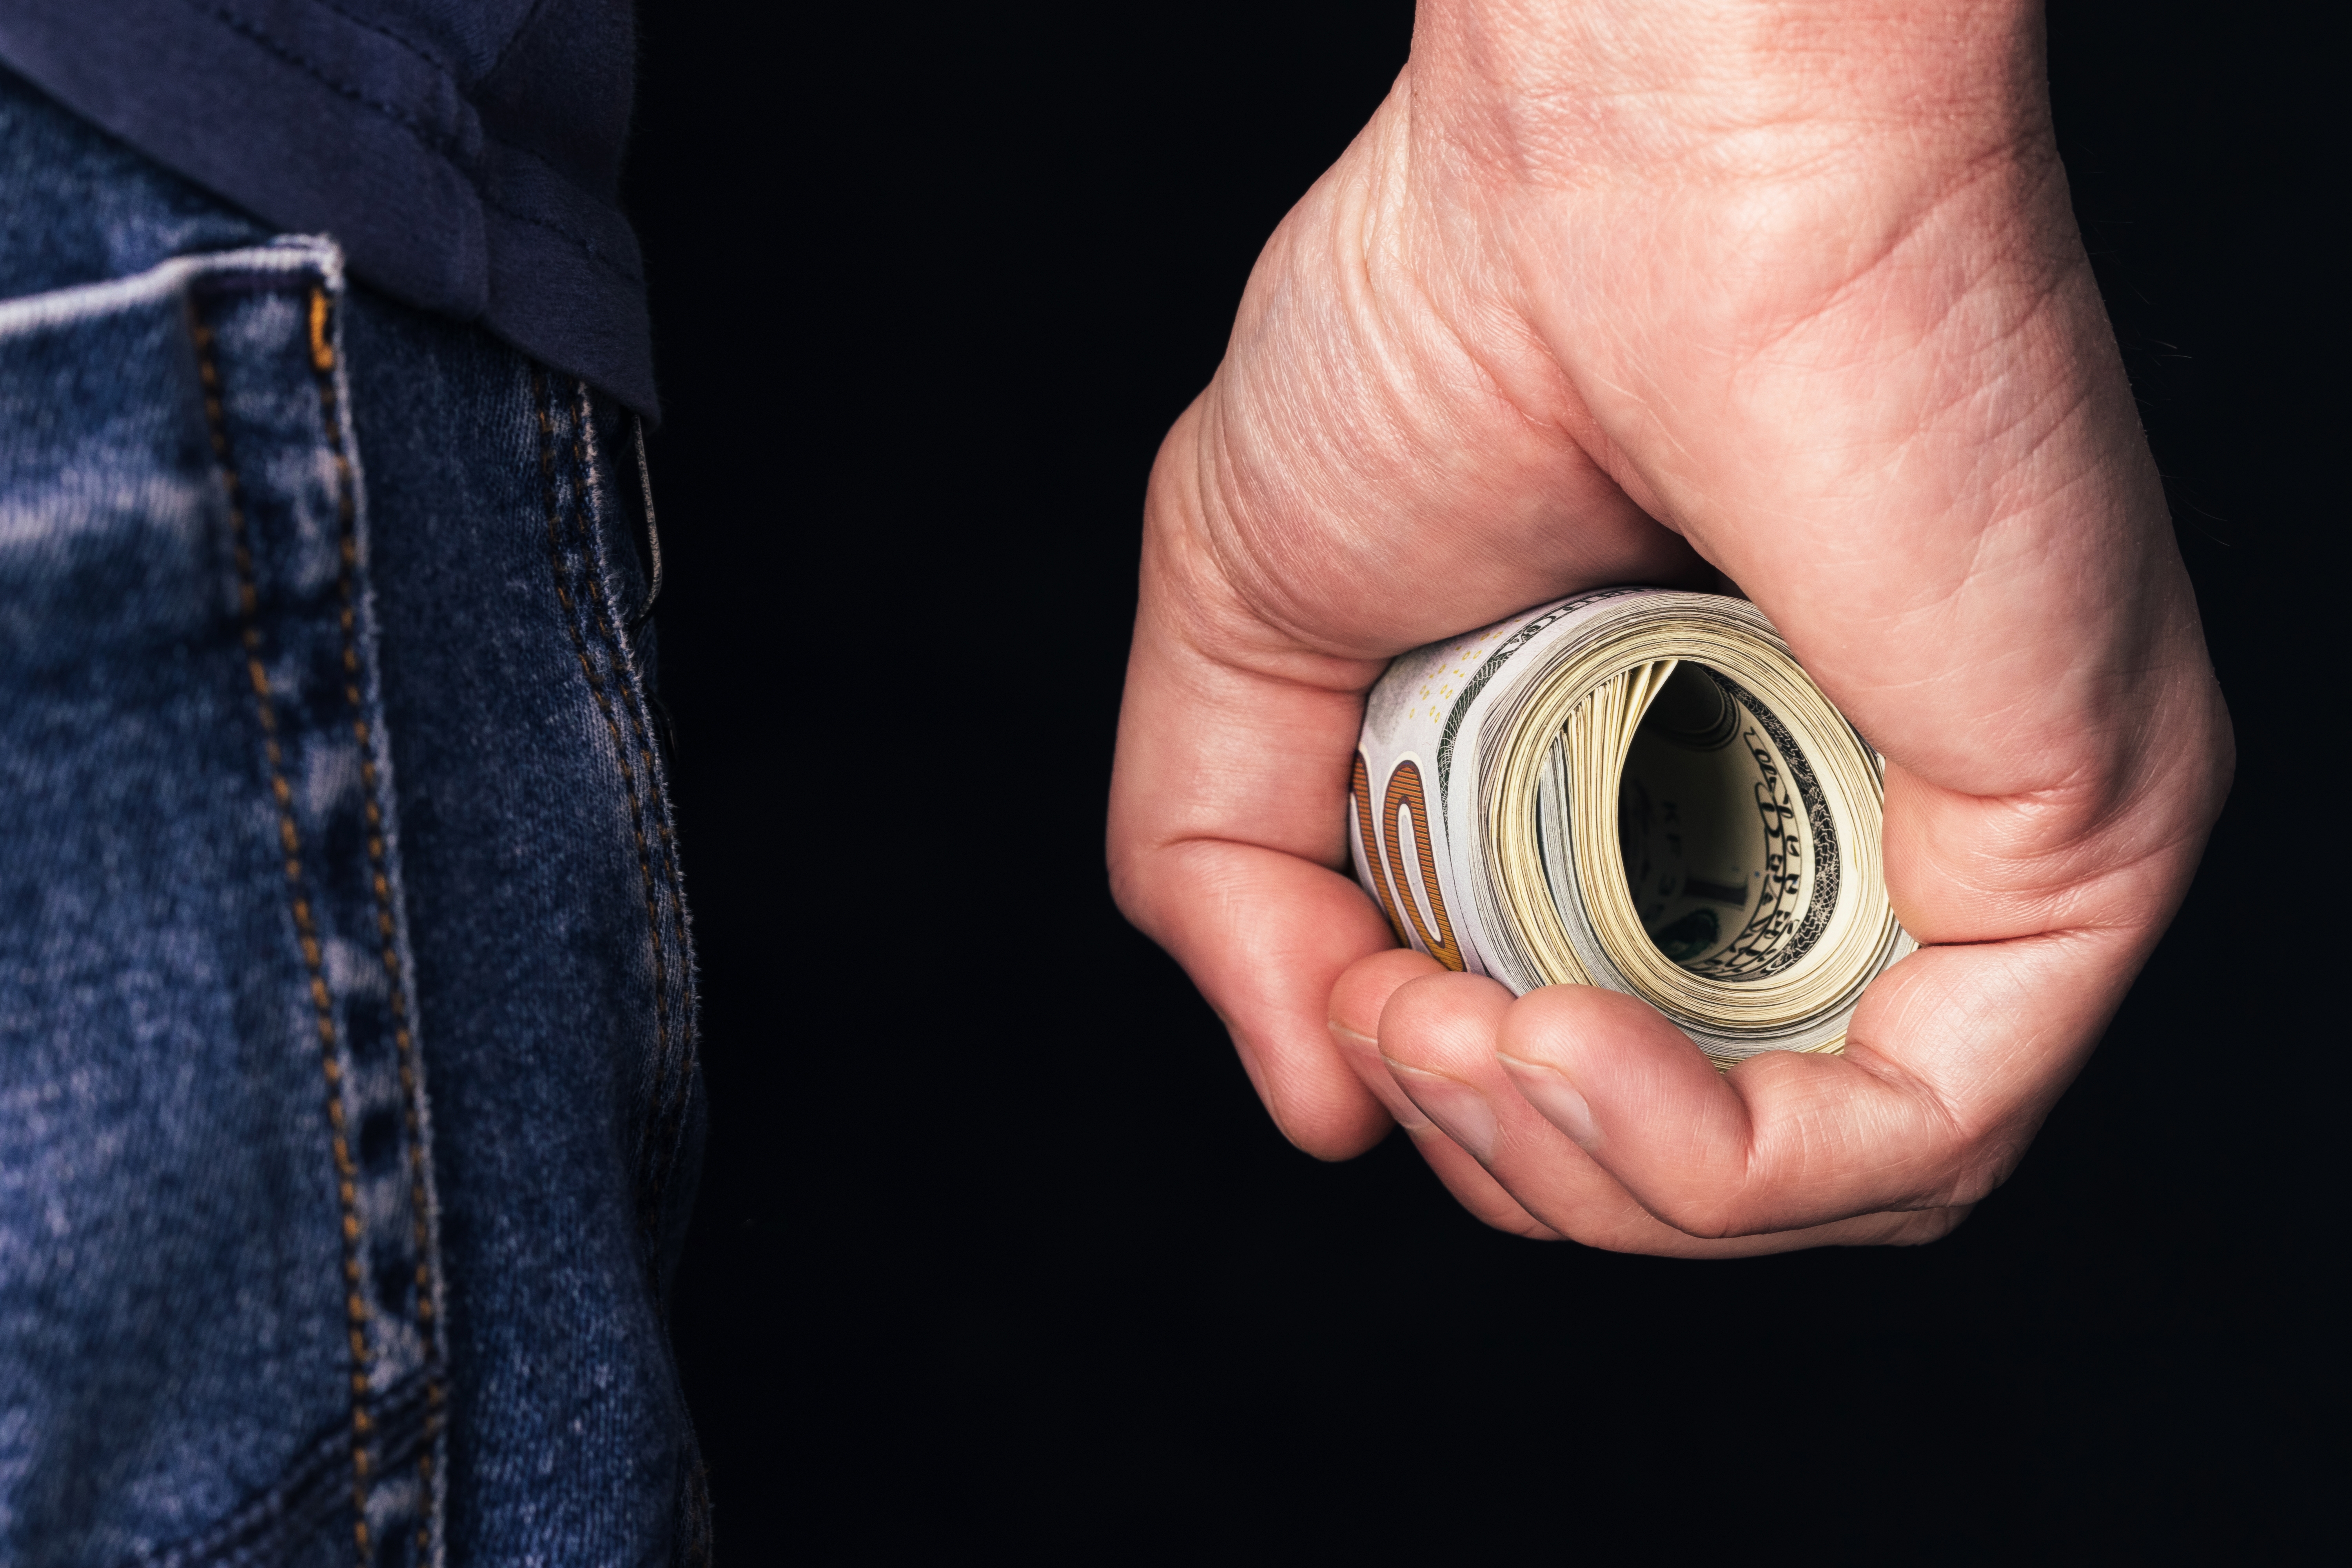 Roll of hundred us dollars in male fist. | Source: Shutterstock